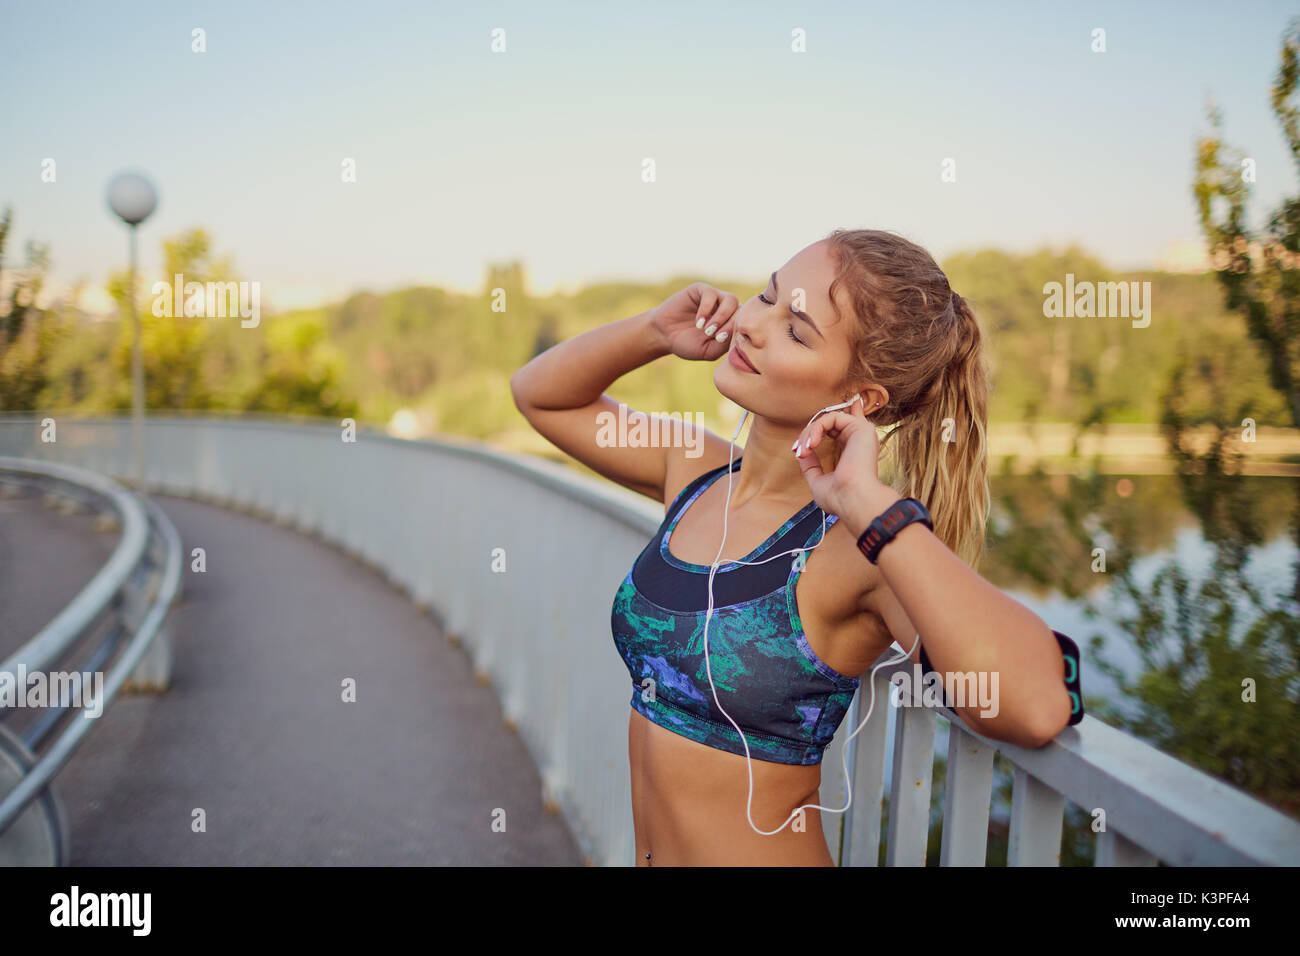 A happy girl jogger listens to music on headphones on a road. Stock Photo